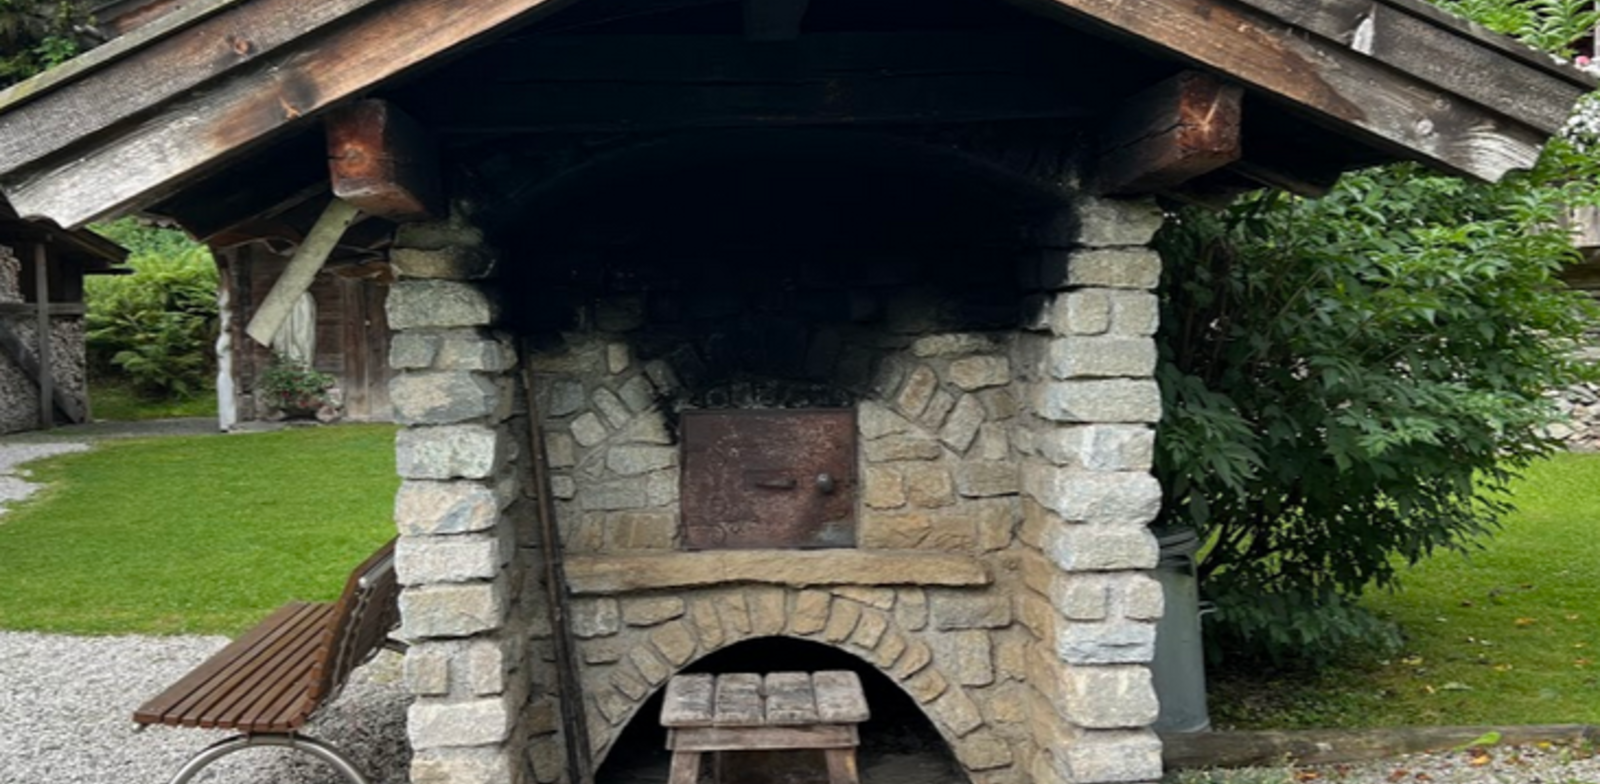 Bread baking oven at the local museum | © Michaela Mitterer